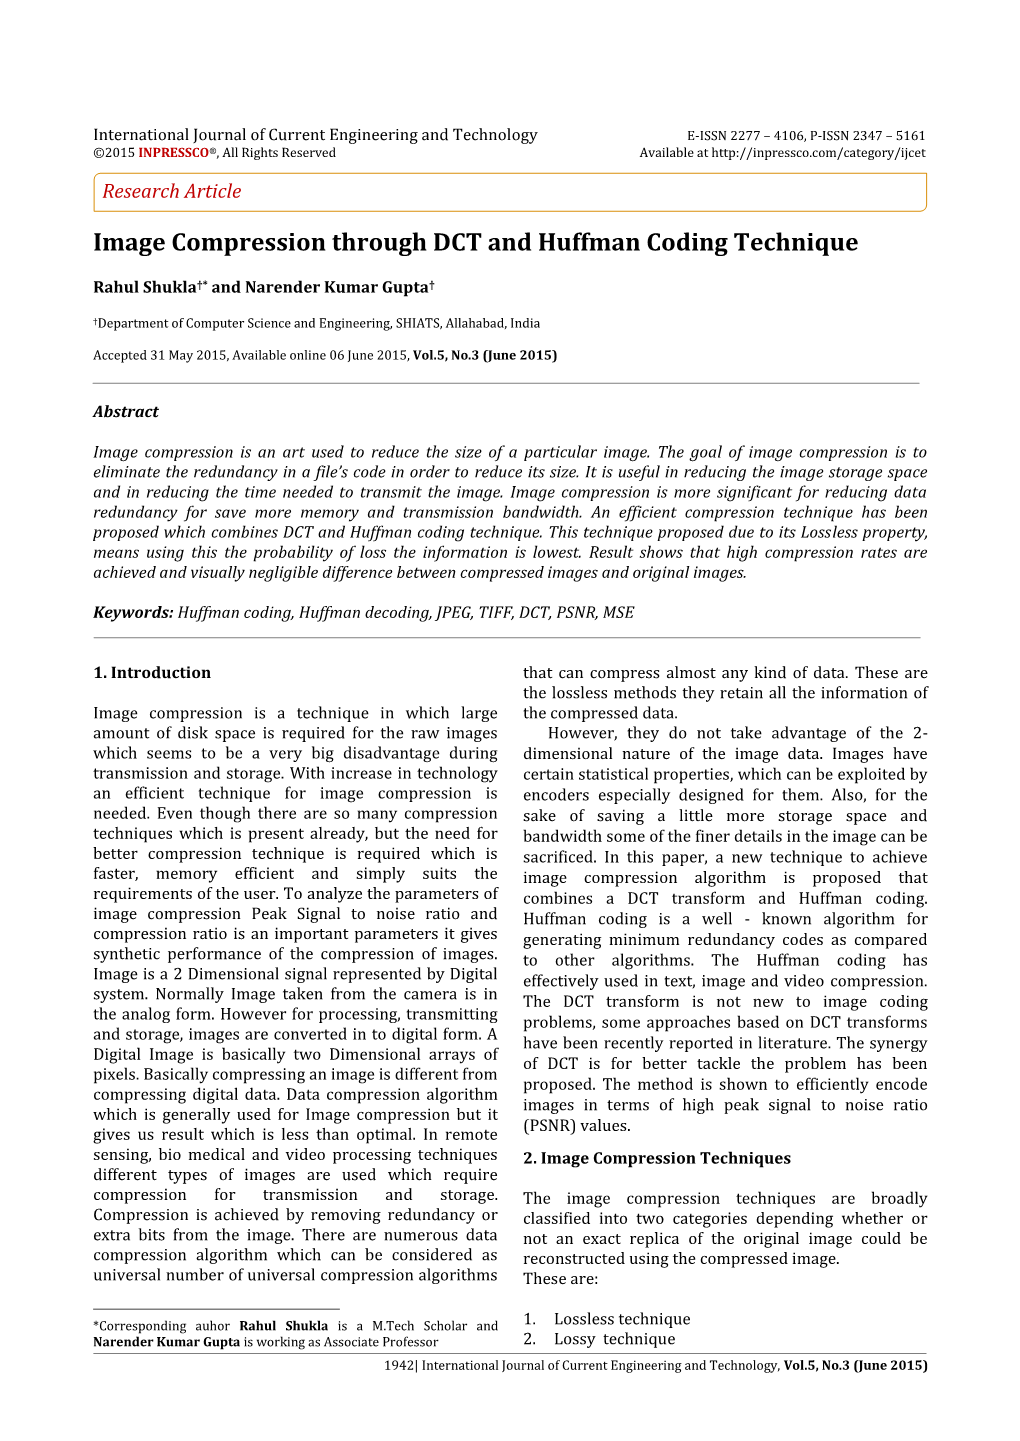 Image Compression Through DCT and Huffman Coding Technique